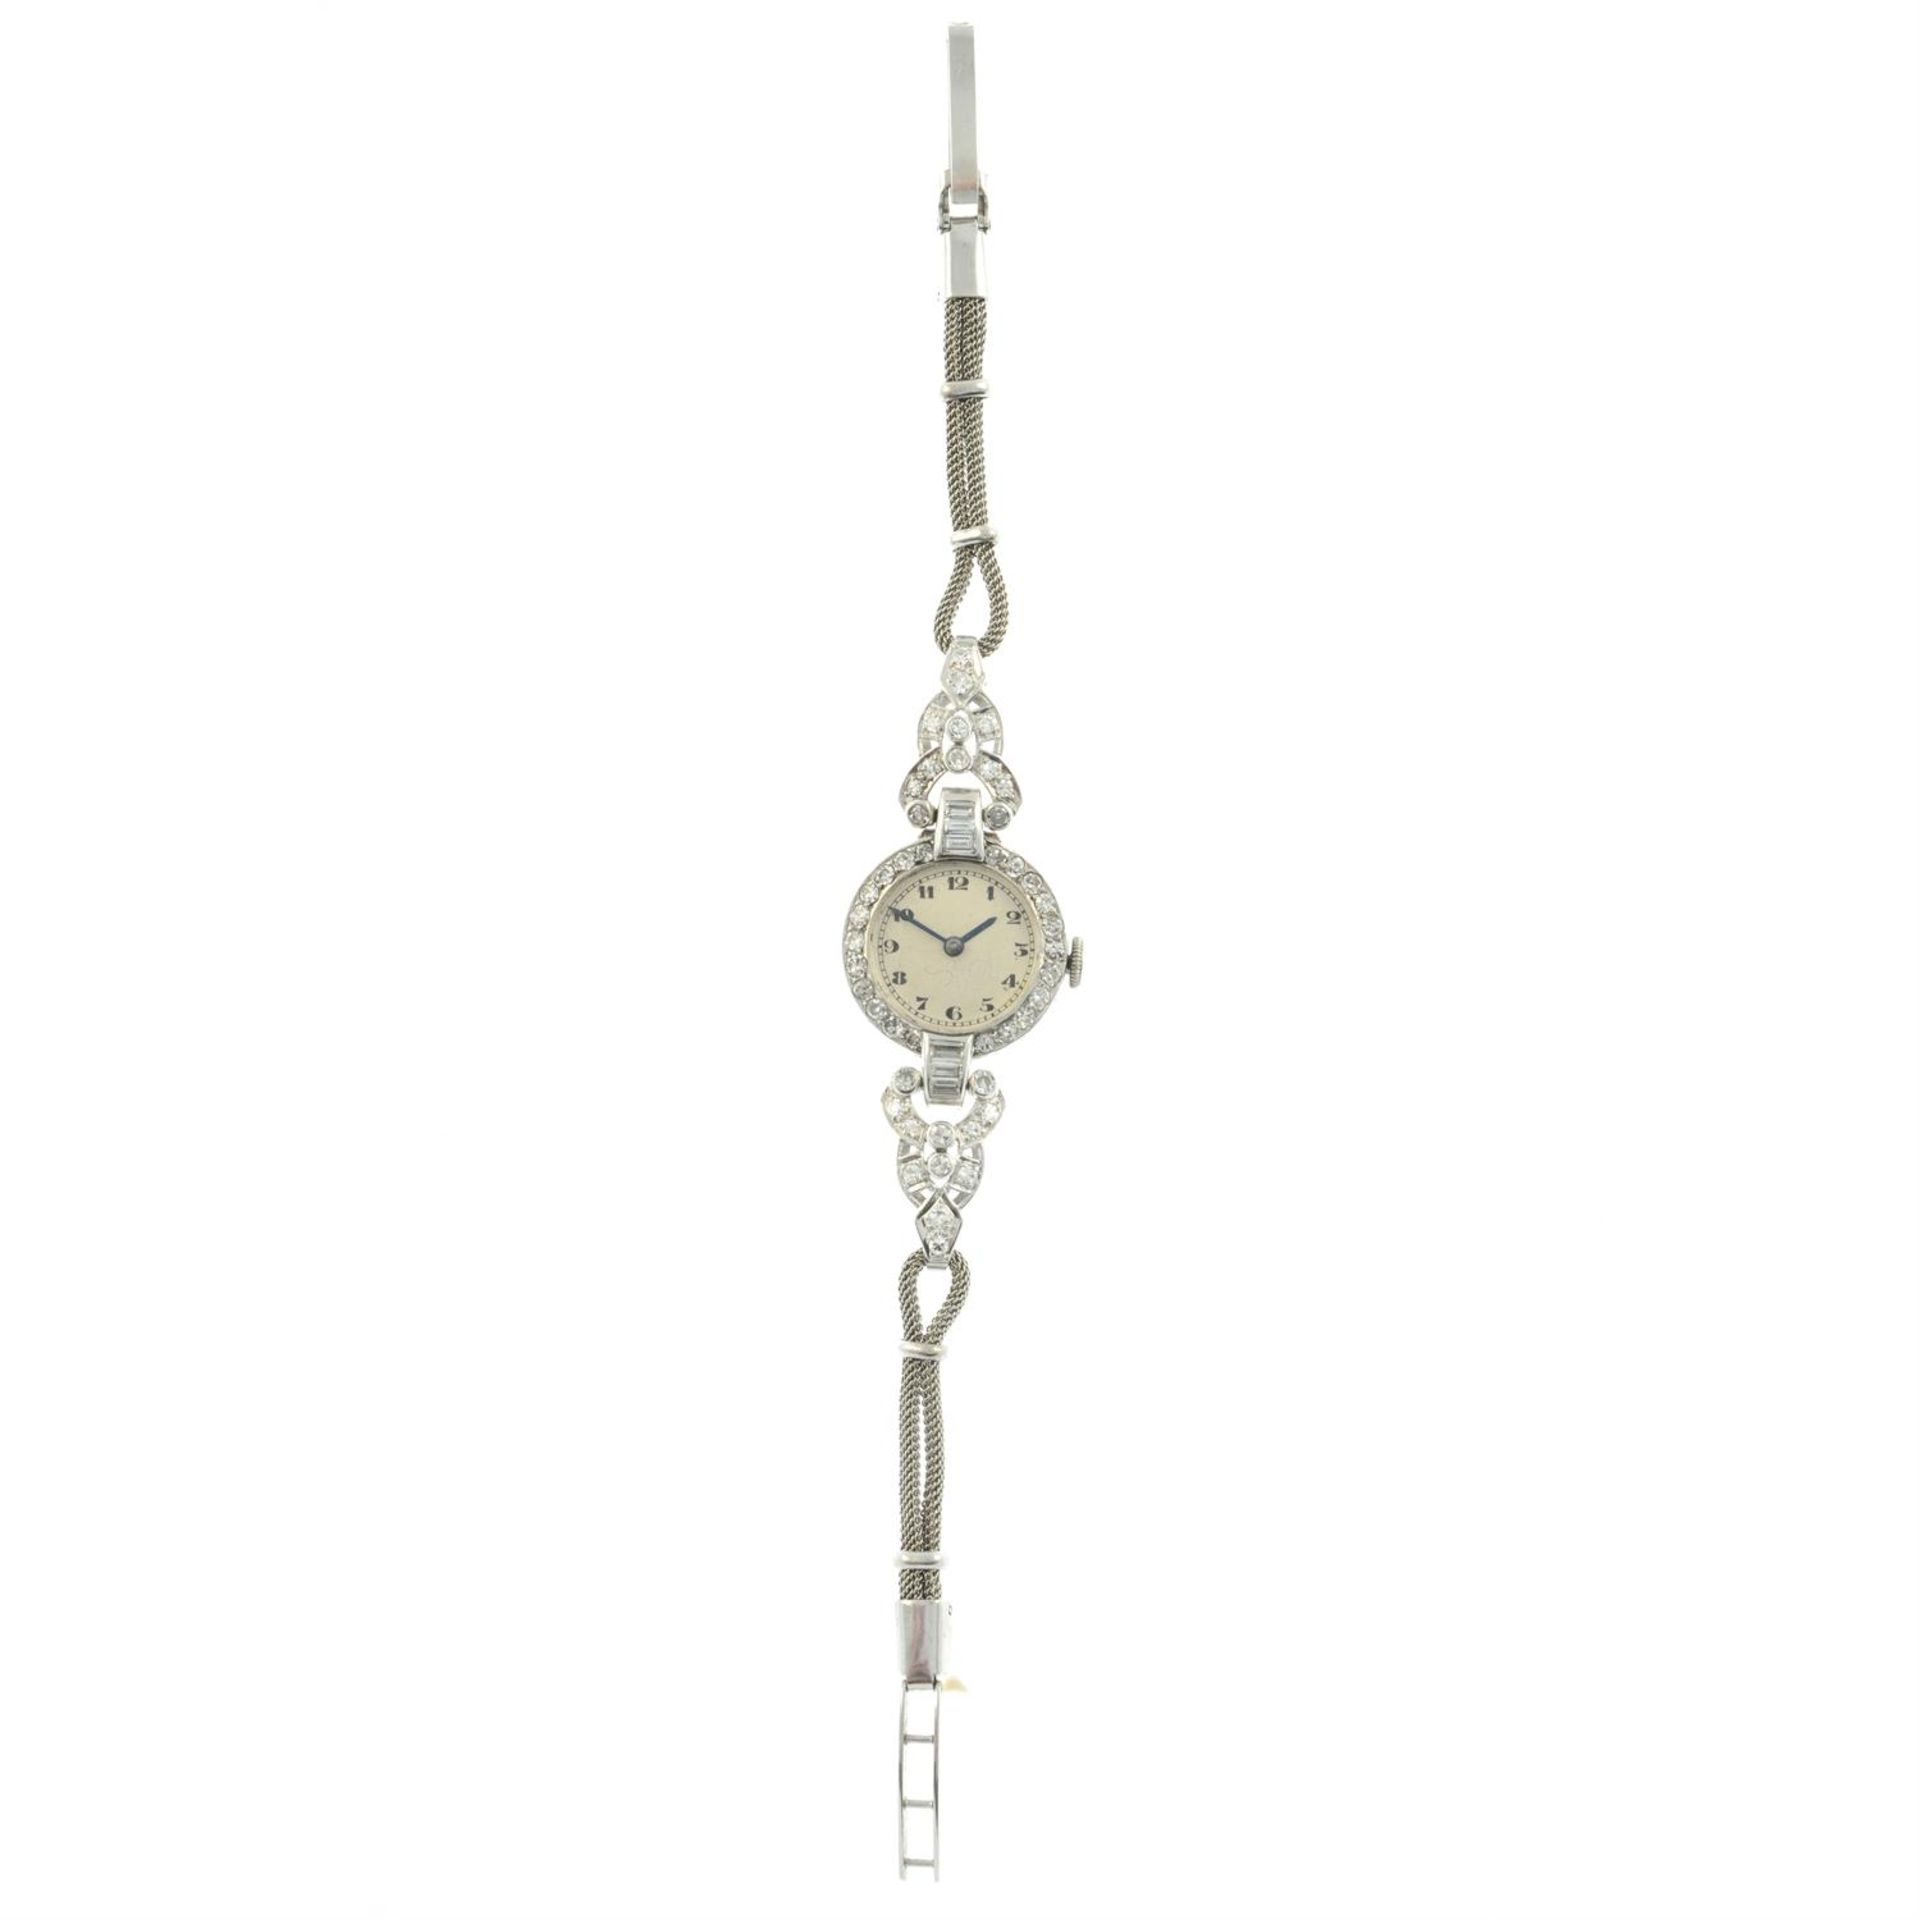 Mid 20th century 9ct gold diamond cocktail watch - Image 2 of 2